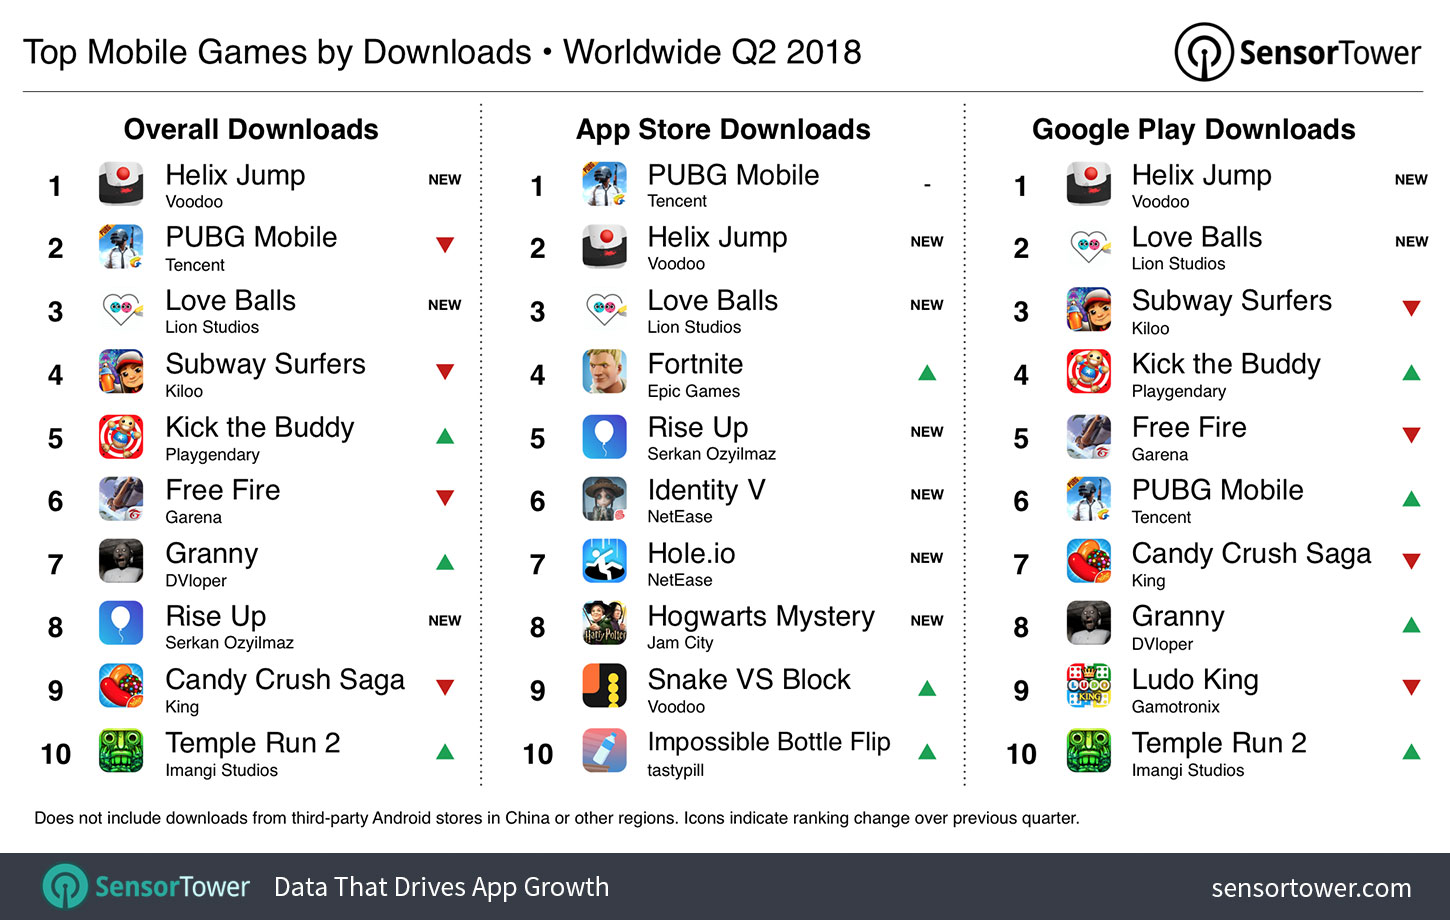 Chart showing the world's most downloaded iOS and Google Play games for Q2 2018